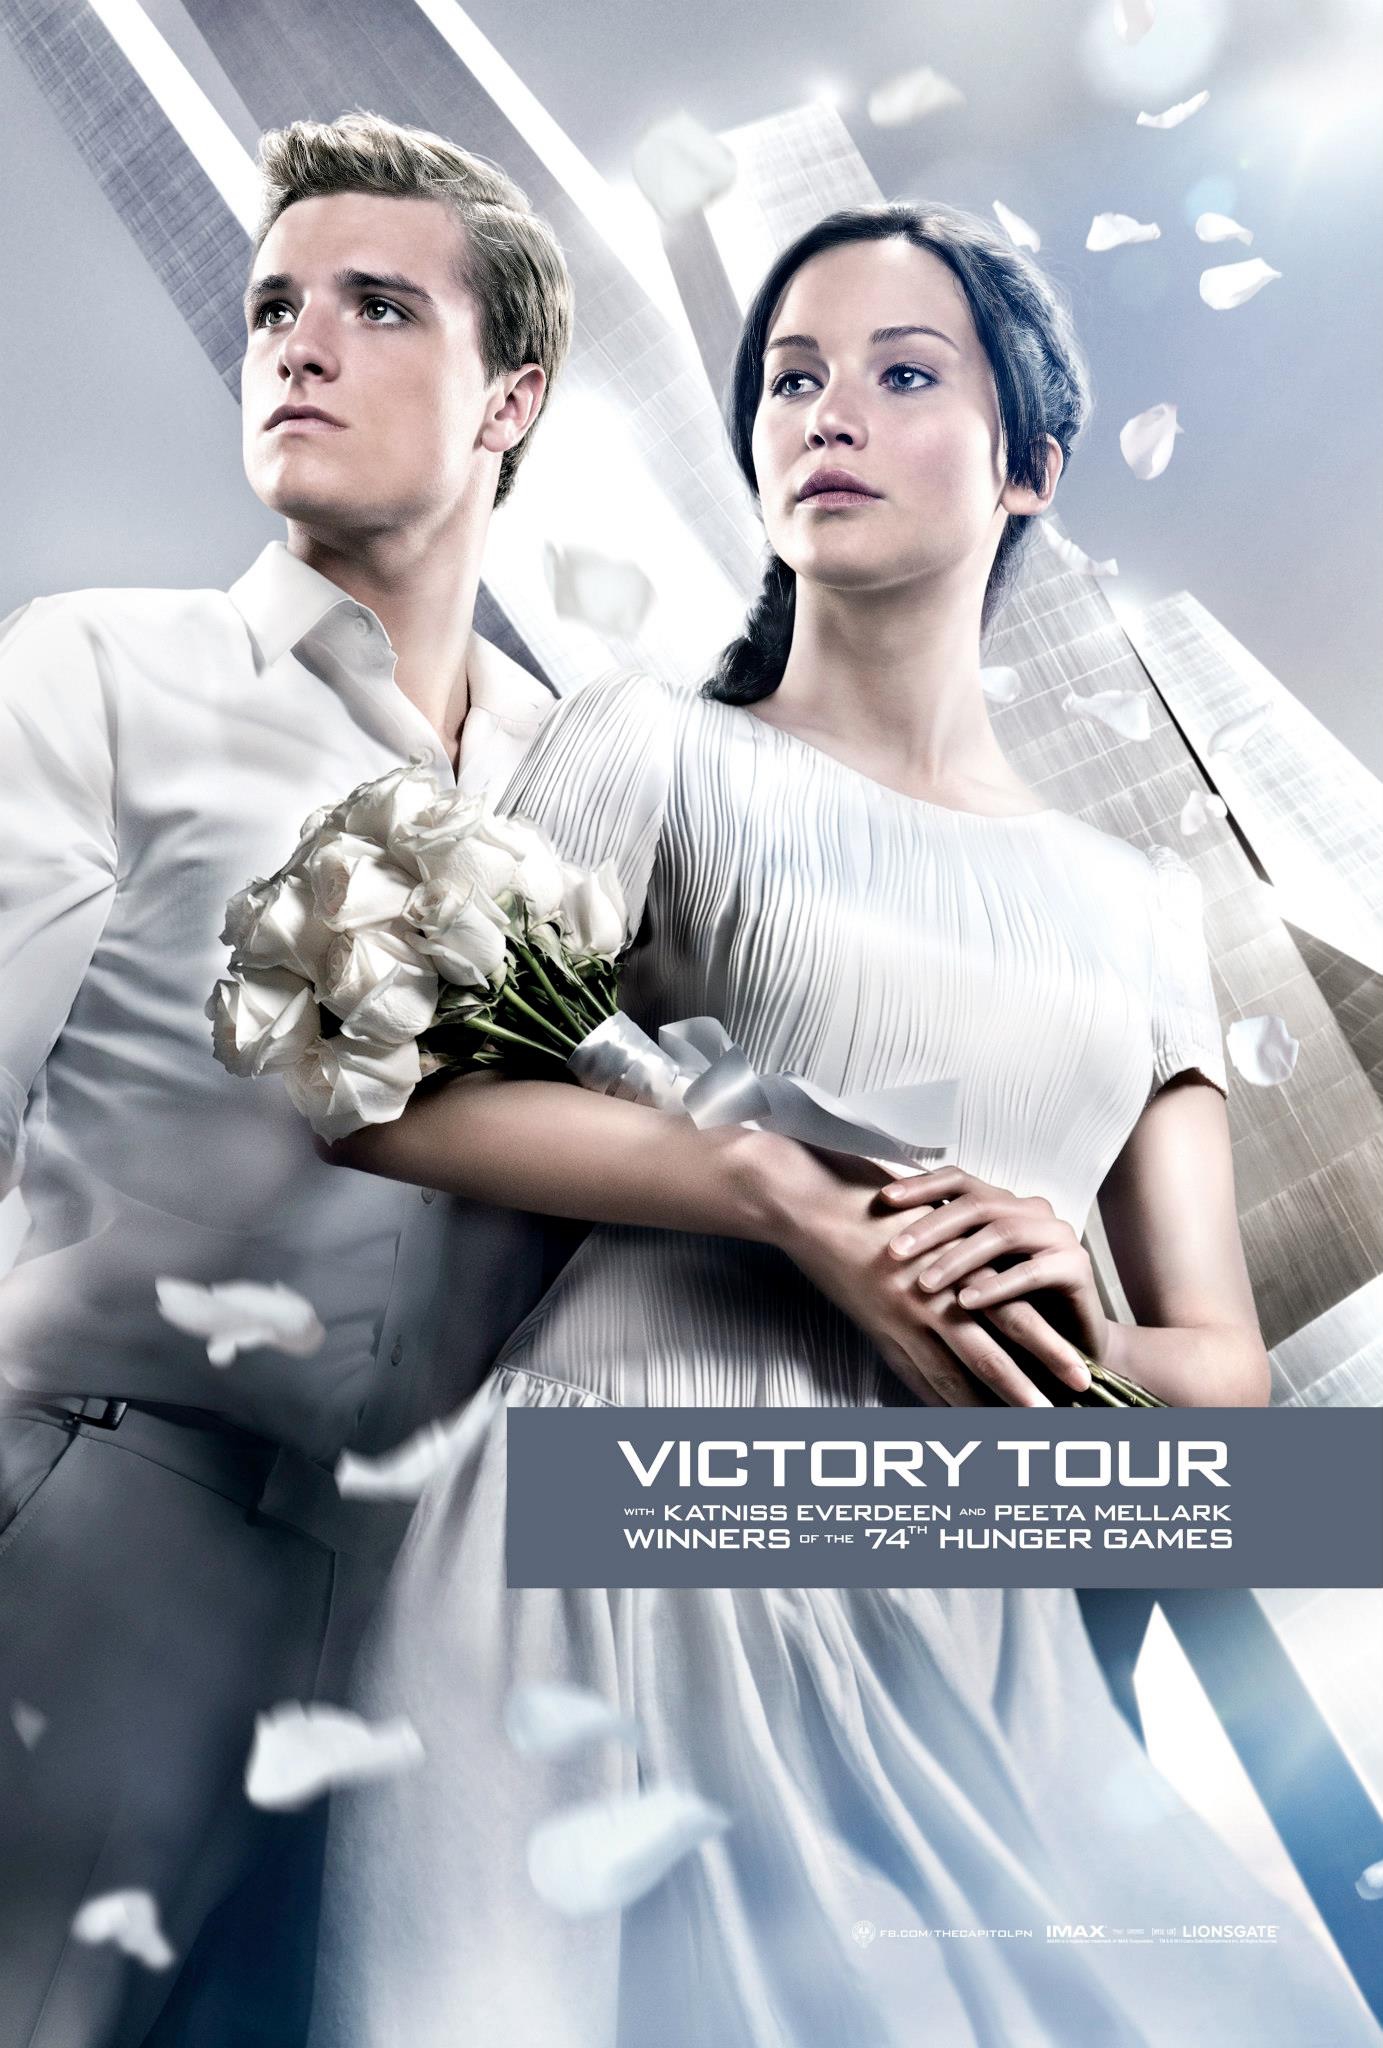 The Hunger Games: Catching Fire - Movie Poster #2 (Original)